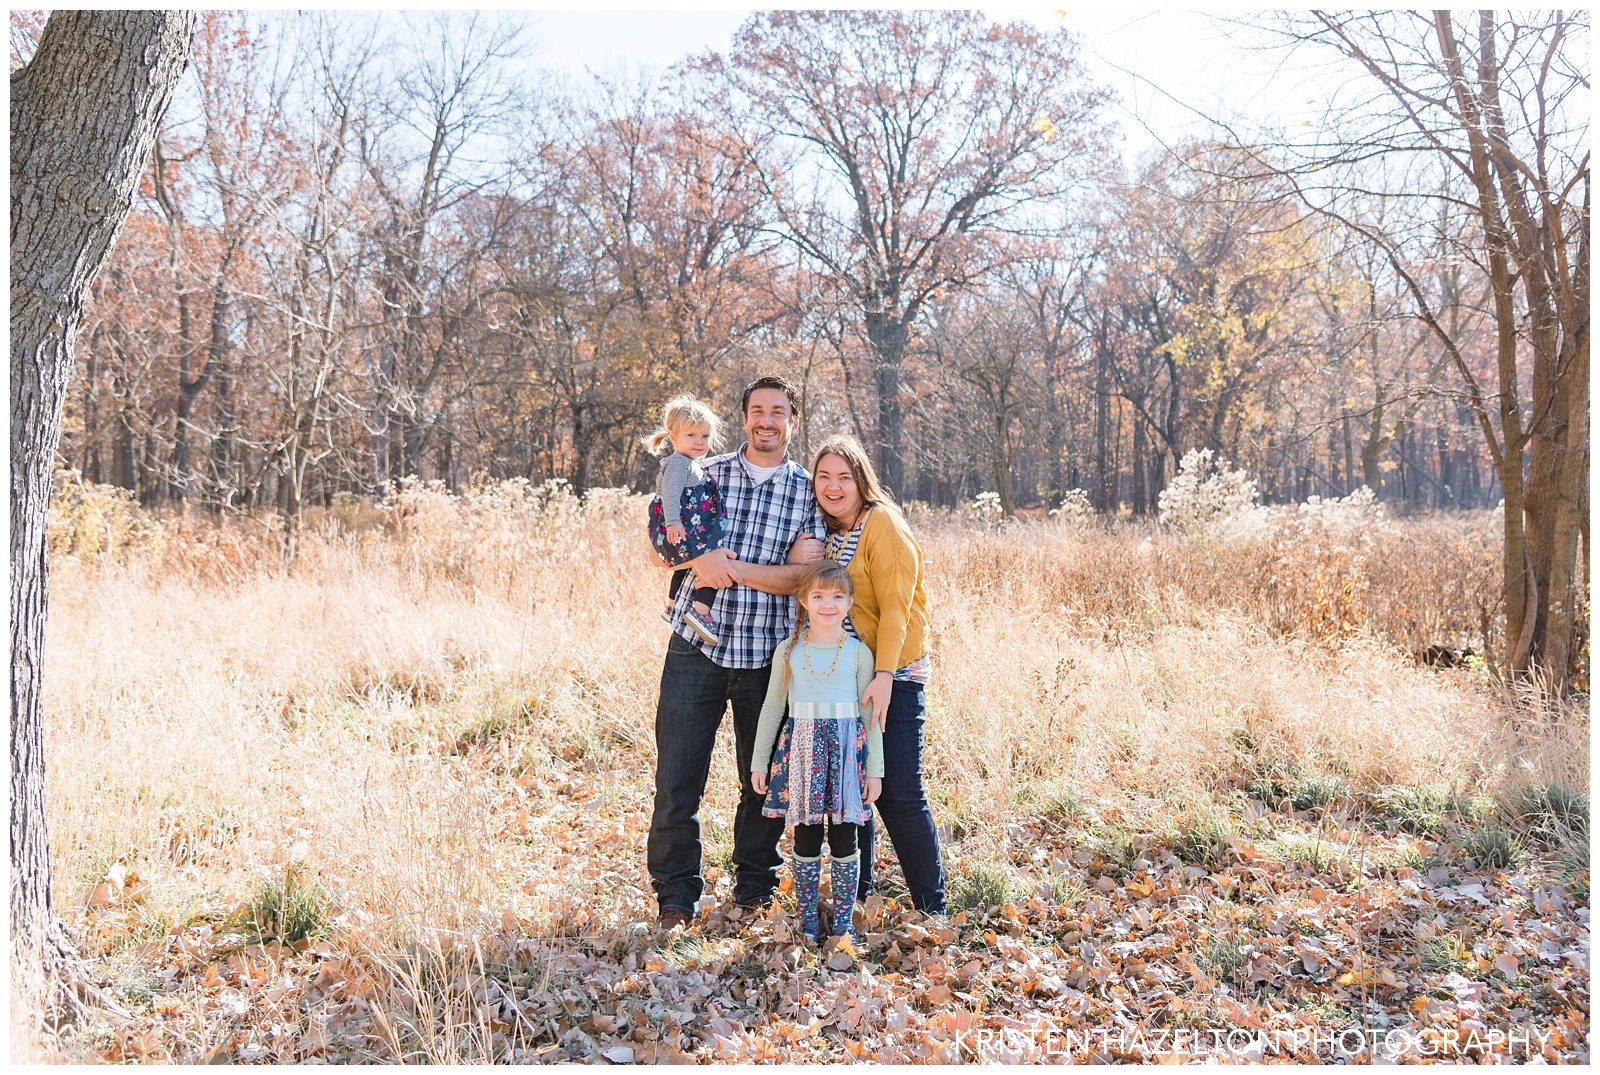 Fall family portraits at Thatcher Woods in River Forest, IL, by Oak Park photographer Kristen Hazelton